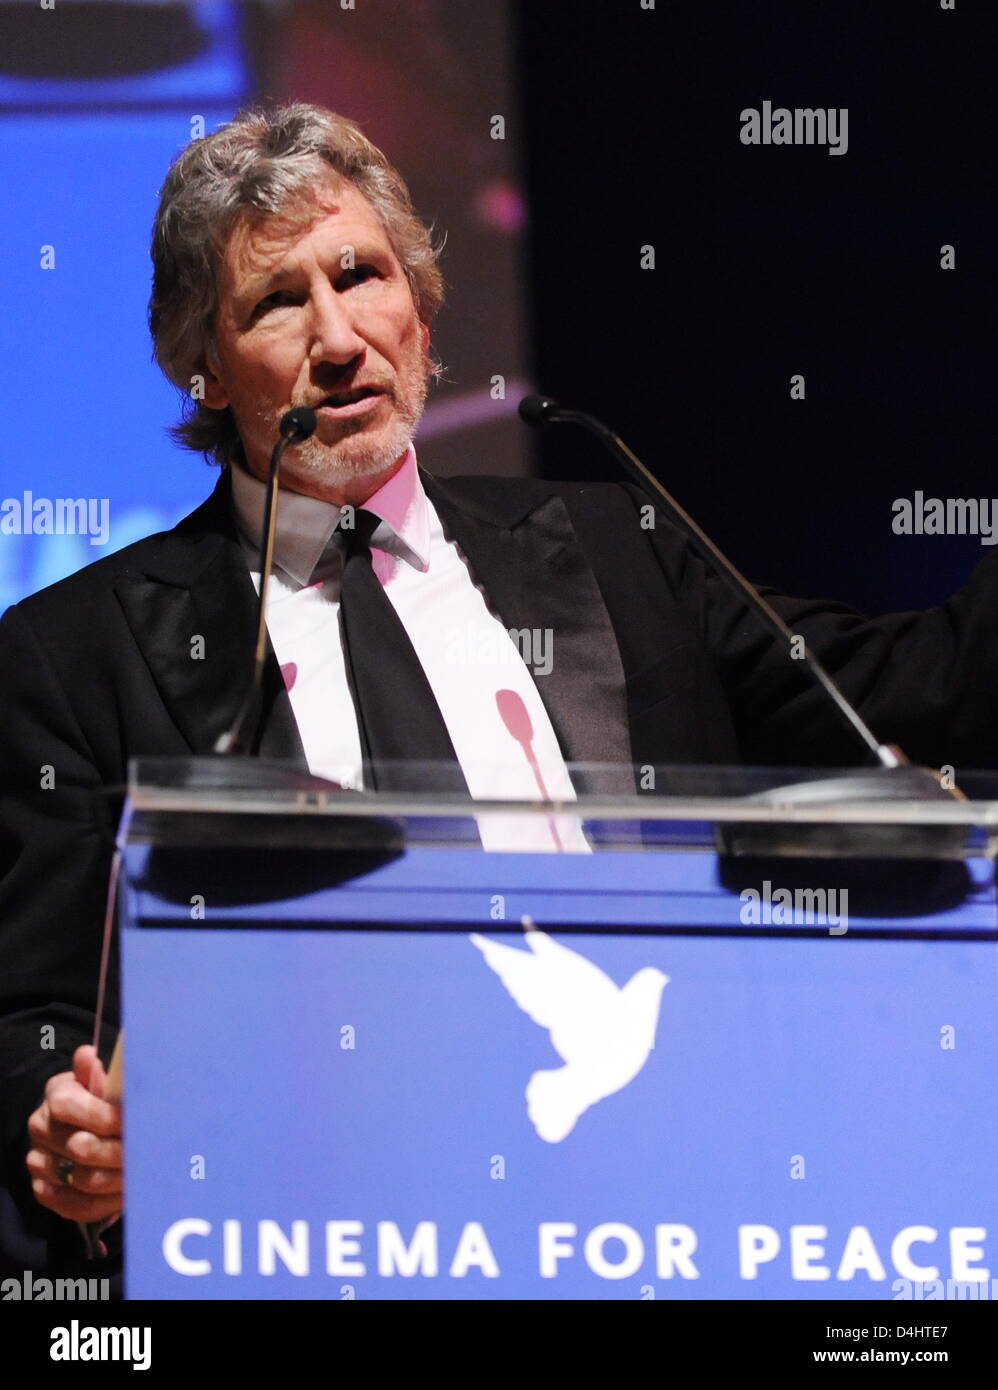 Pink-Floyd bassist Roger Waters speaks at the ?Cinema for Peace? gala at the 59th Berlin International Film Festival in Berlin, Germany, 09 February 2009. ?Cinema for Peace? is a worldwide initiative promoting humanity through film. Members of the international film community have created a platform for peace and tolerance. Screenwriters, directors and producers are celebrated with Stock Photo